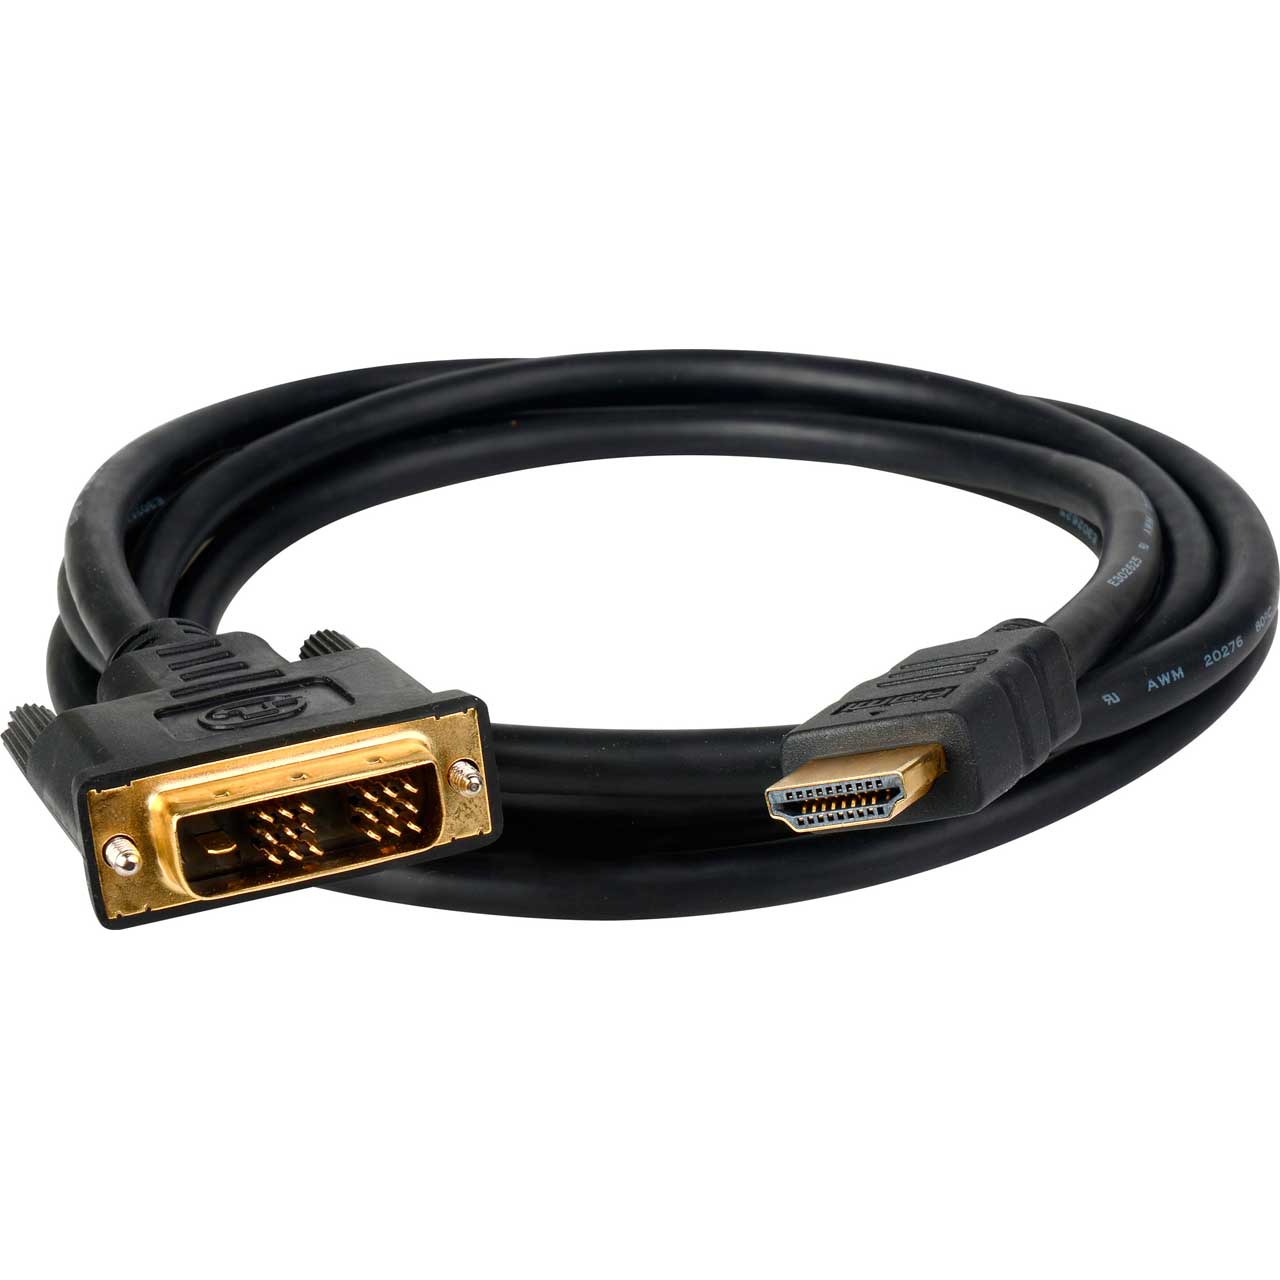 Connectronics HDMI to DVI-D Digital Monitor Adapter - 6 Foot